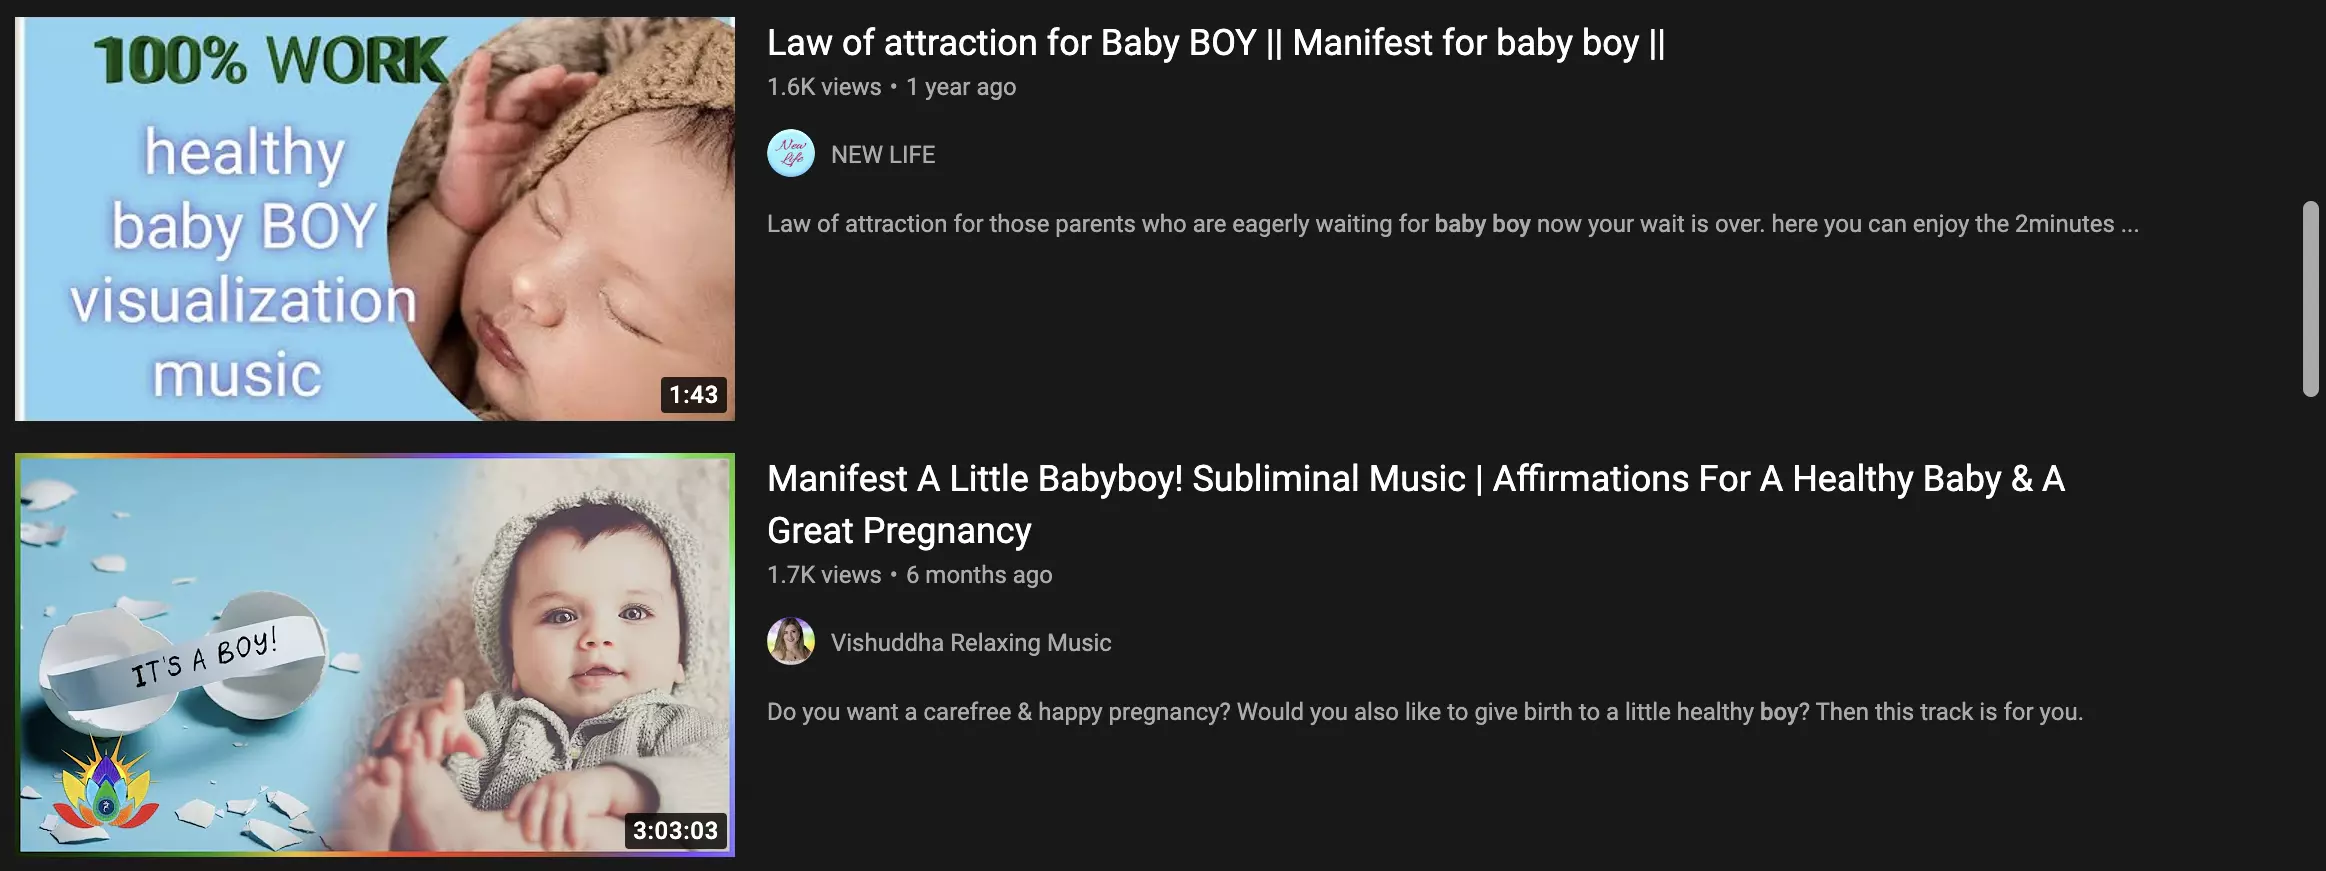 Many Indians have explicitly mentioned that they want to manifest a boy child and then have immediately explained themselves by saying that they are under a lot of pressure.